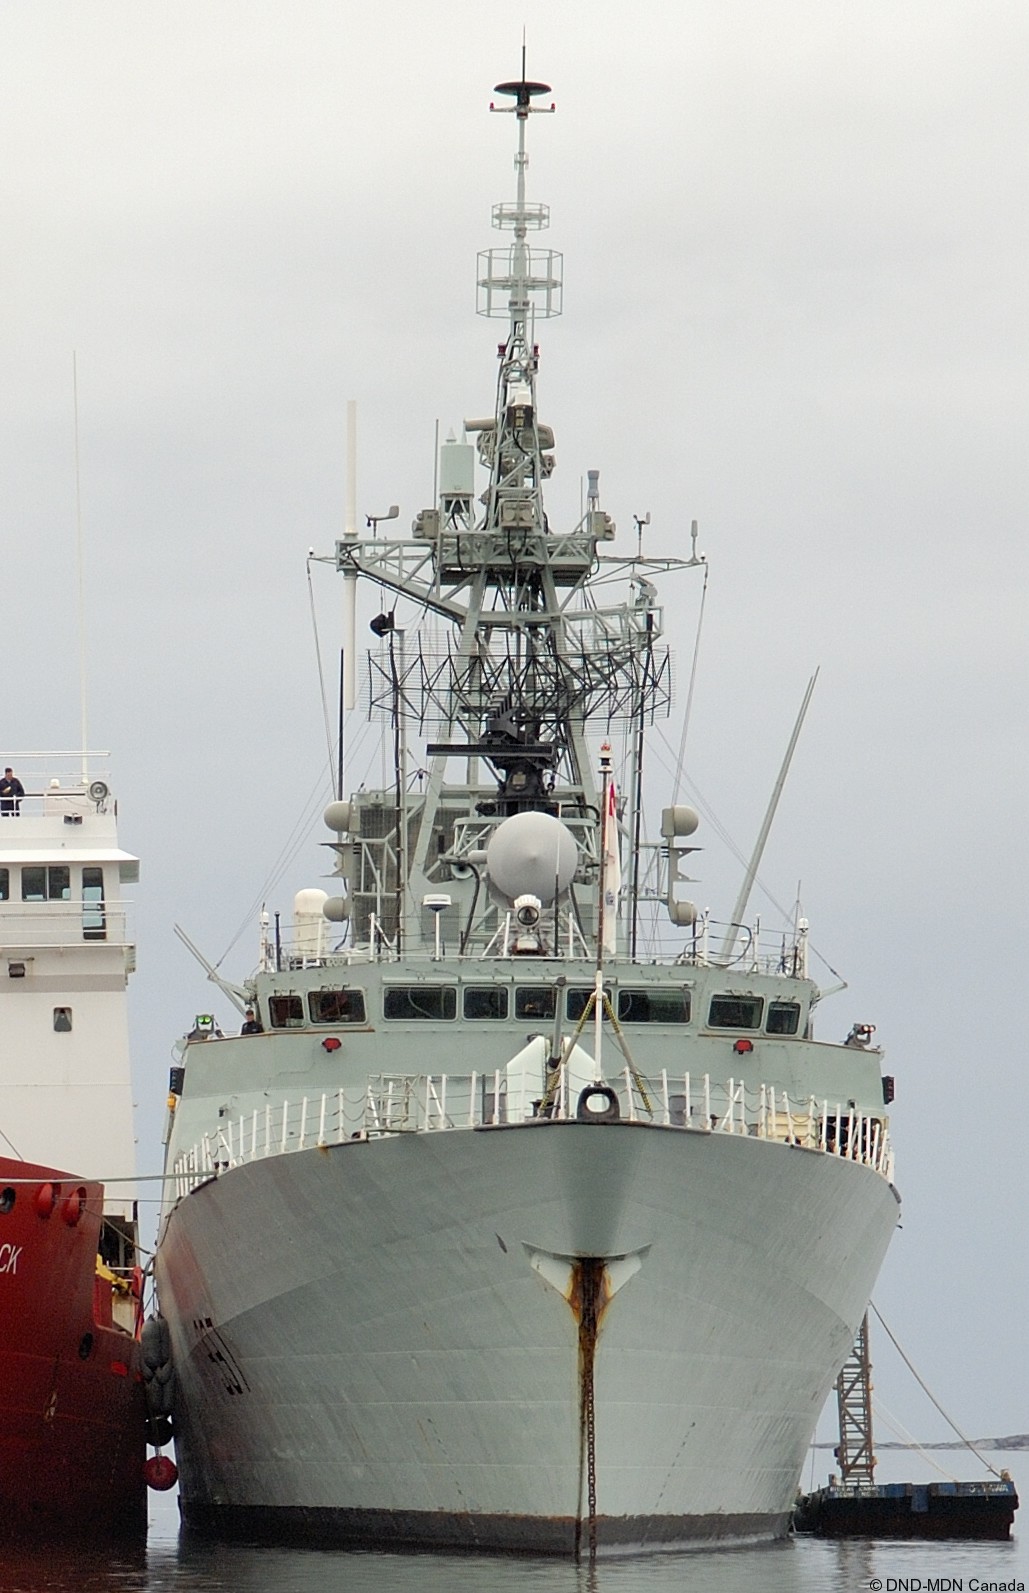 ffh-337 hmcs fredericton halifax class helicopter patrol frigate ncsm royal canadian navy 39